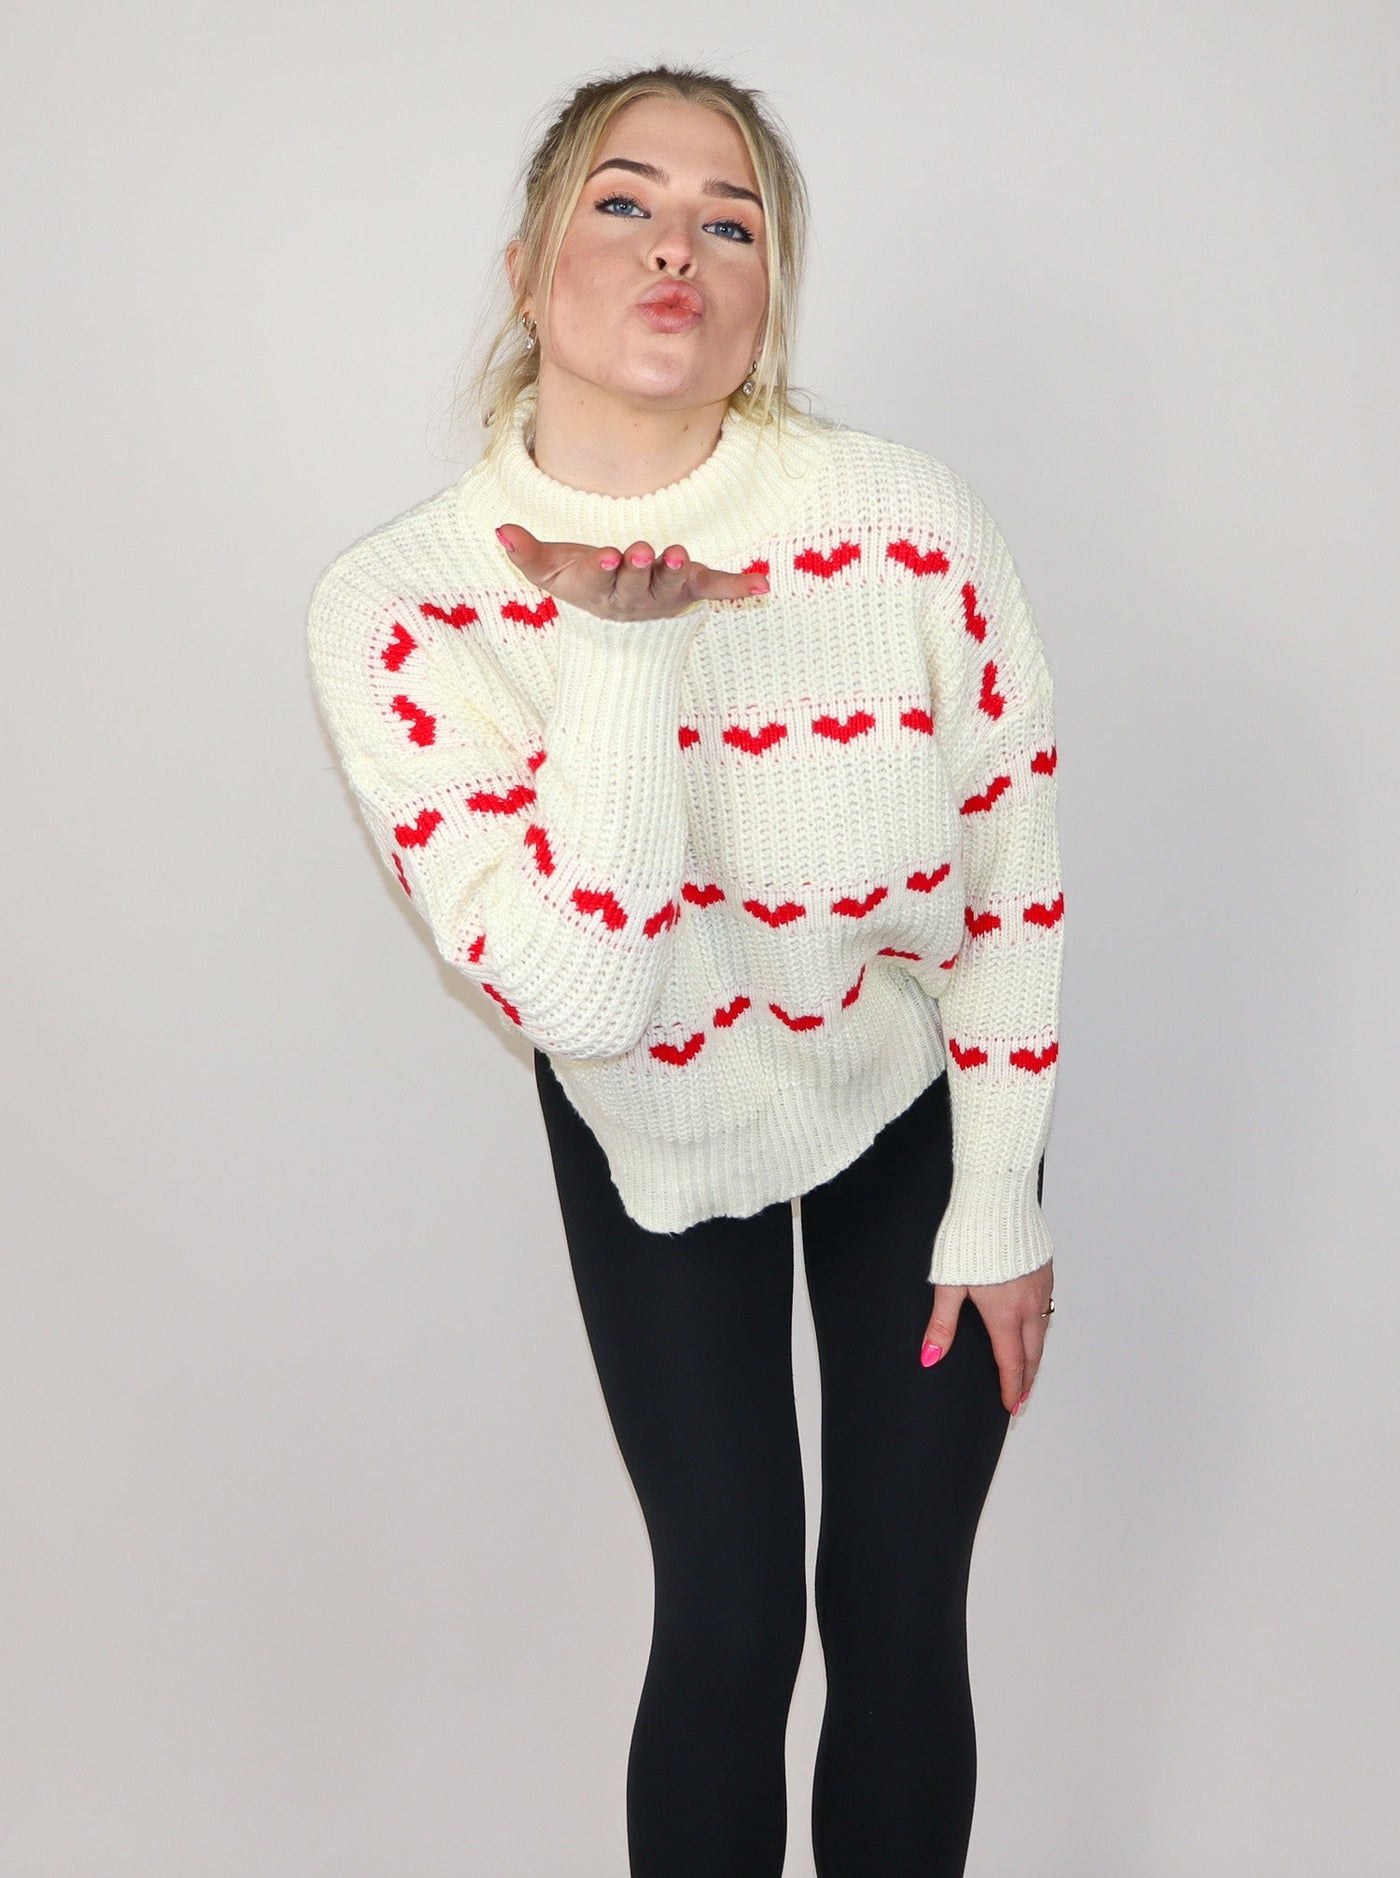 Model is wearing a white knitted turtle neck sweater with horizontal rows of small red hearts.